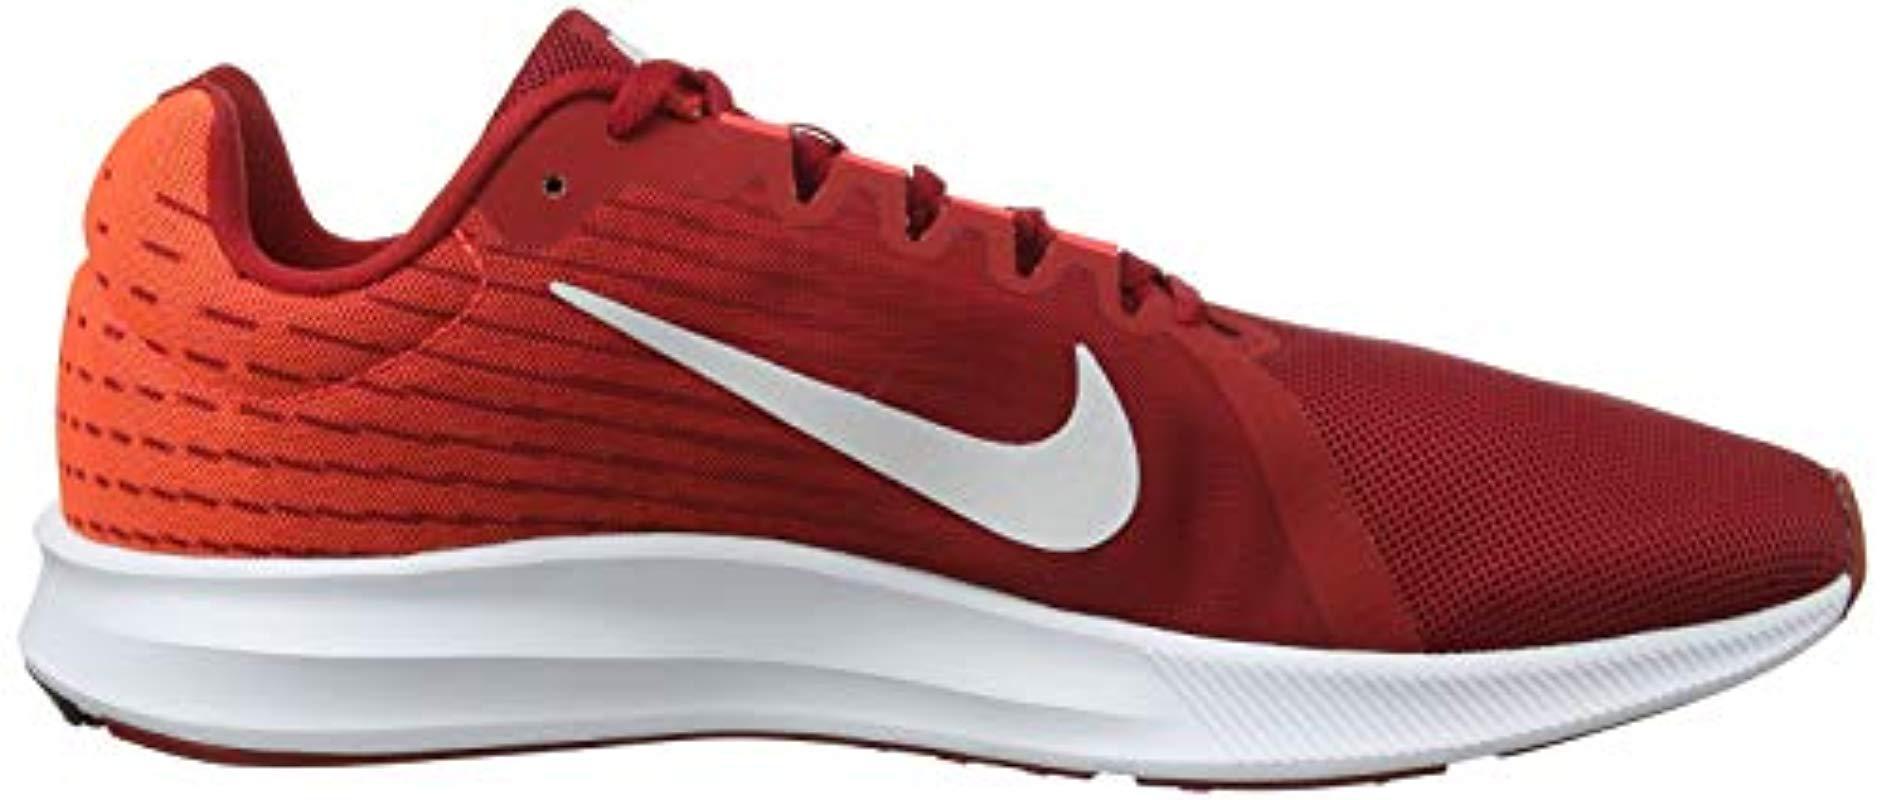 Nike Downshifter 8 Running Shoe in Black/White/Anthracite (Red) for Men |  Lyst